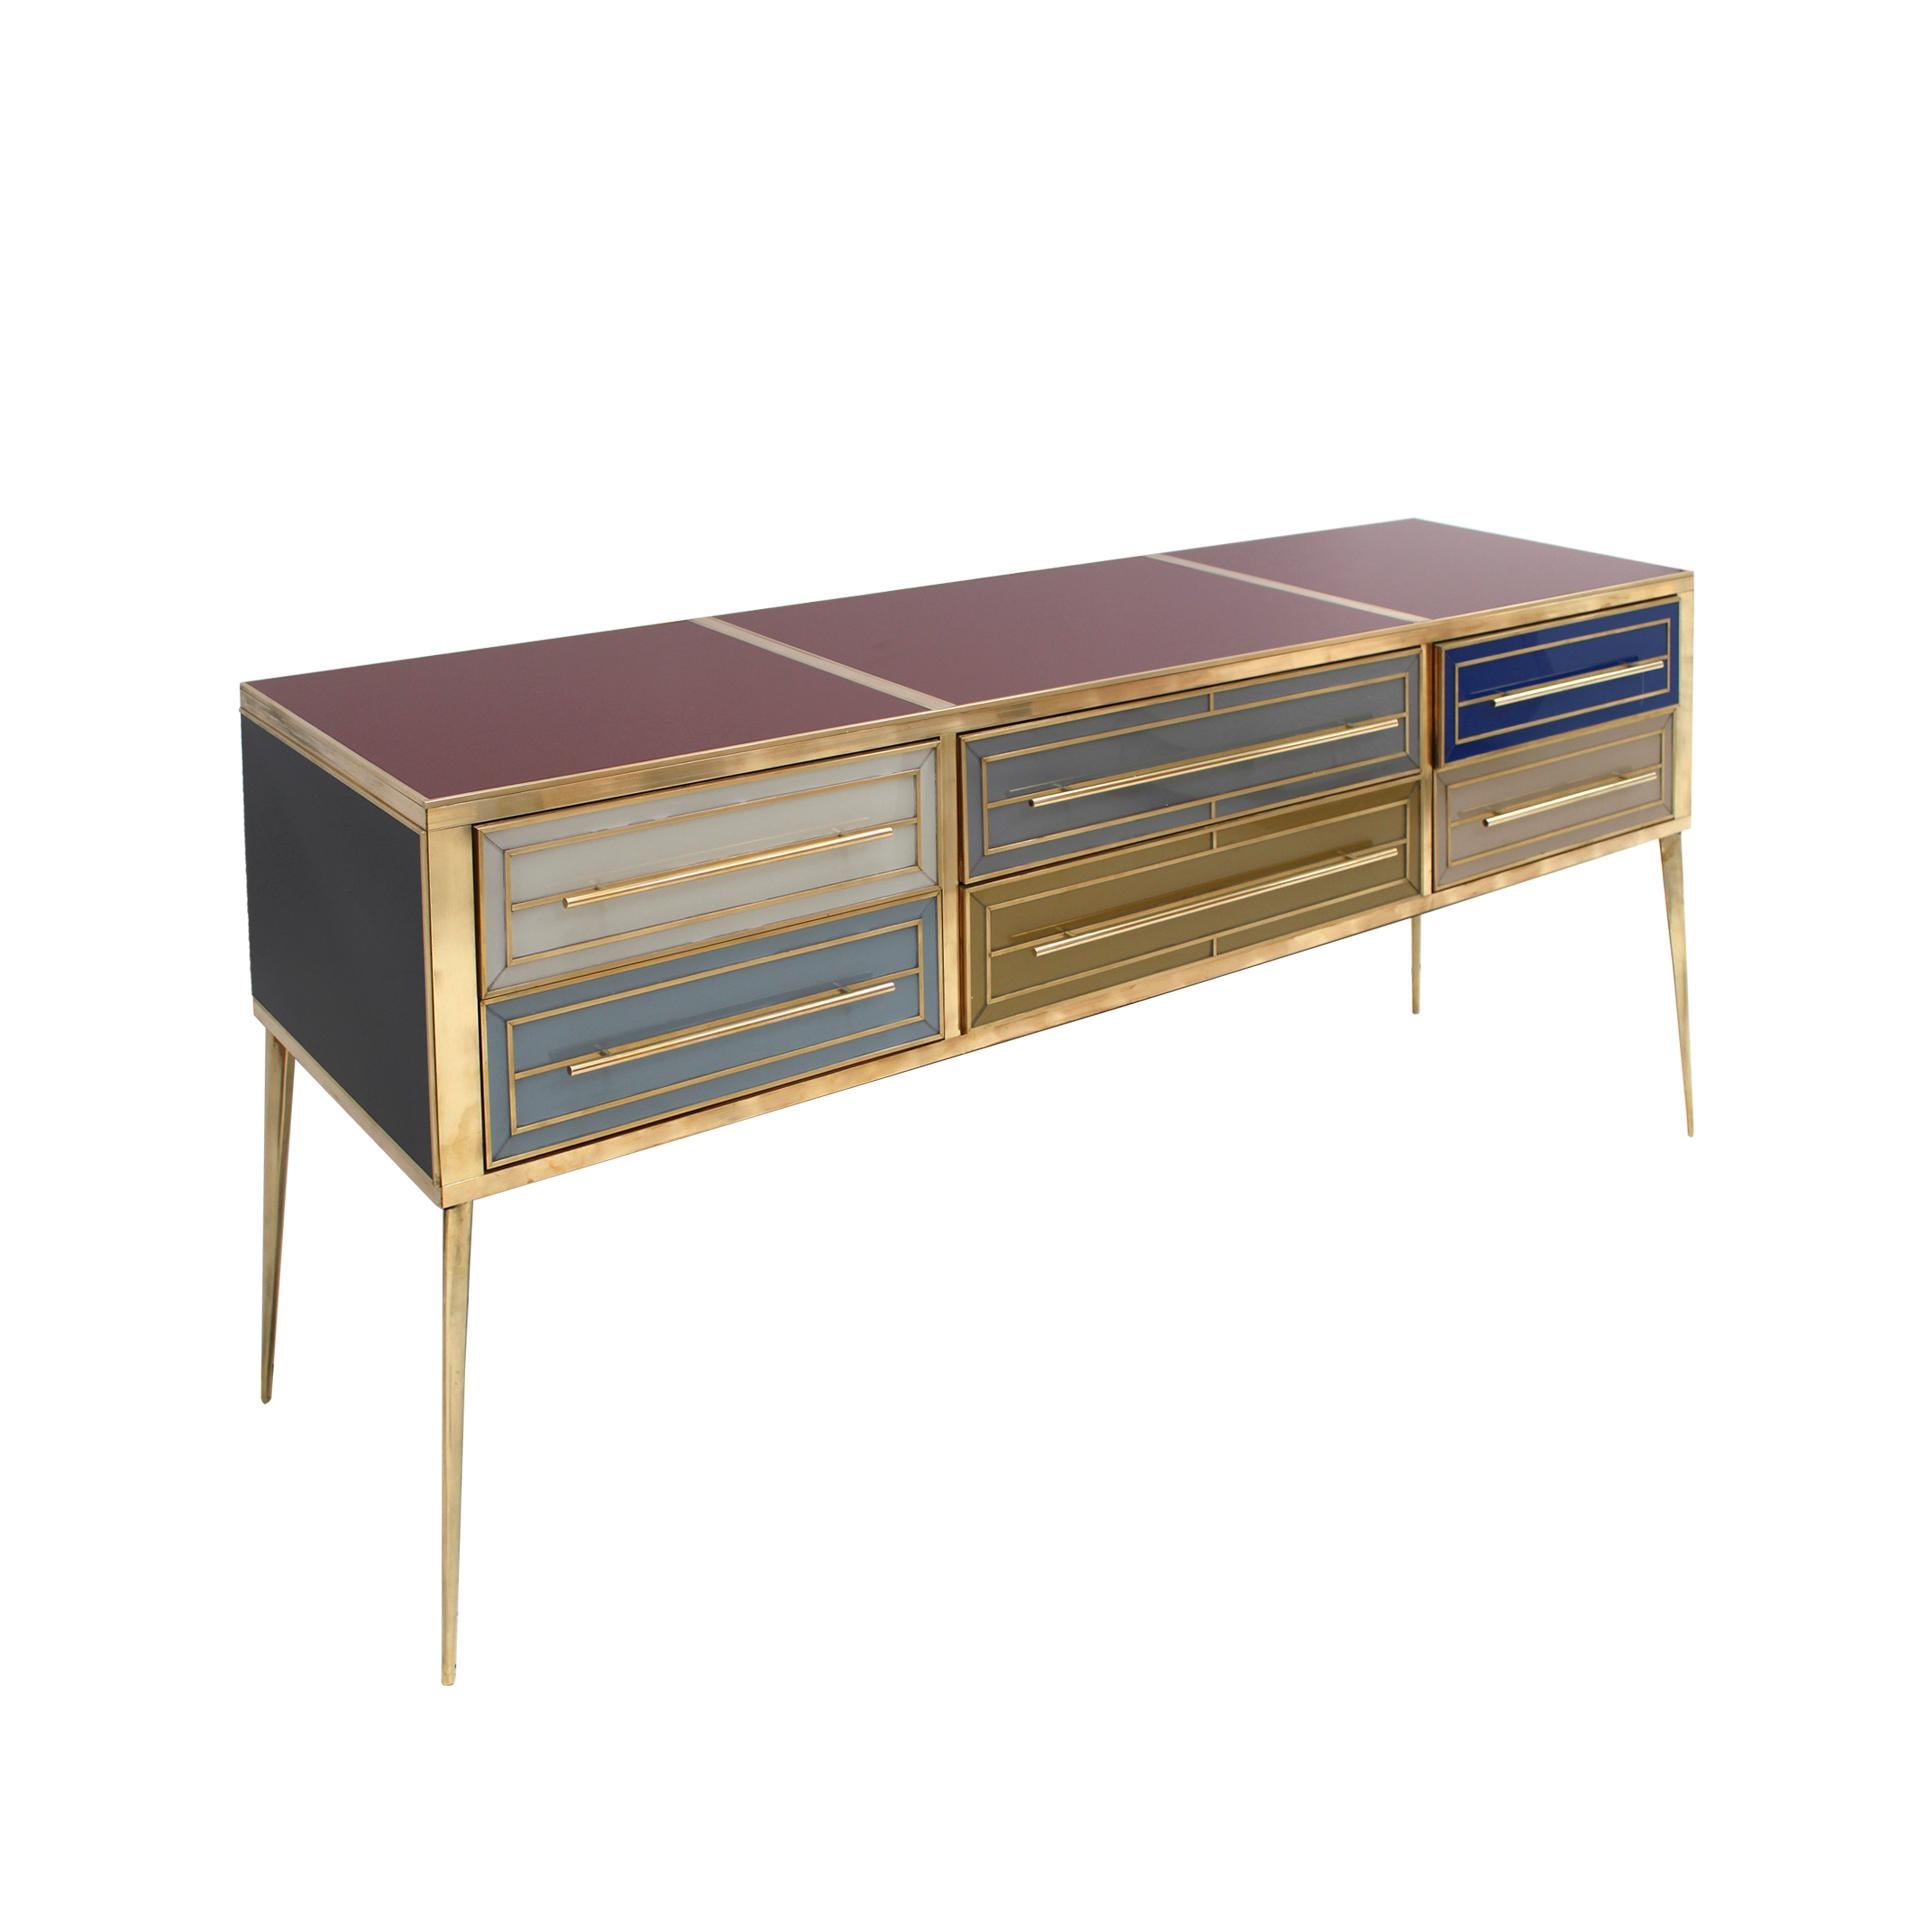 Sideboard composed of 6 drawers with an original structure from the 1950s made of solid wood and covered with colored glass. Handles, legs and profiles made of brass. Italy, 1950s.

Our main target is customer satisfaction, so we include in the